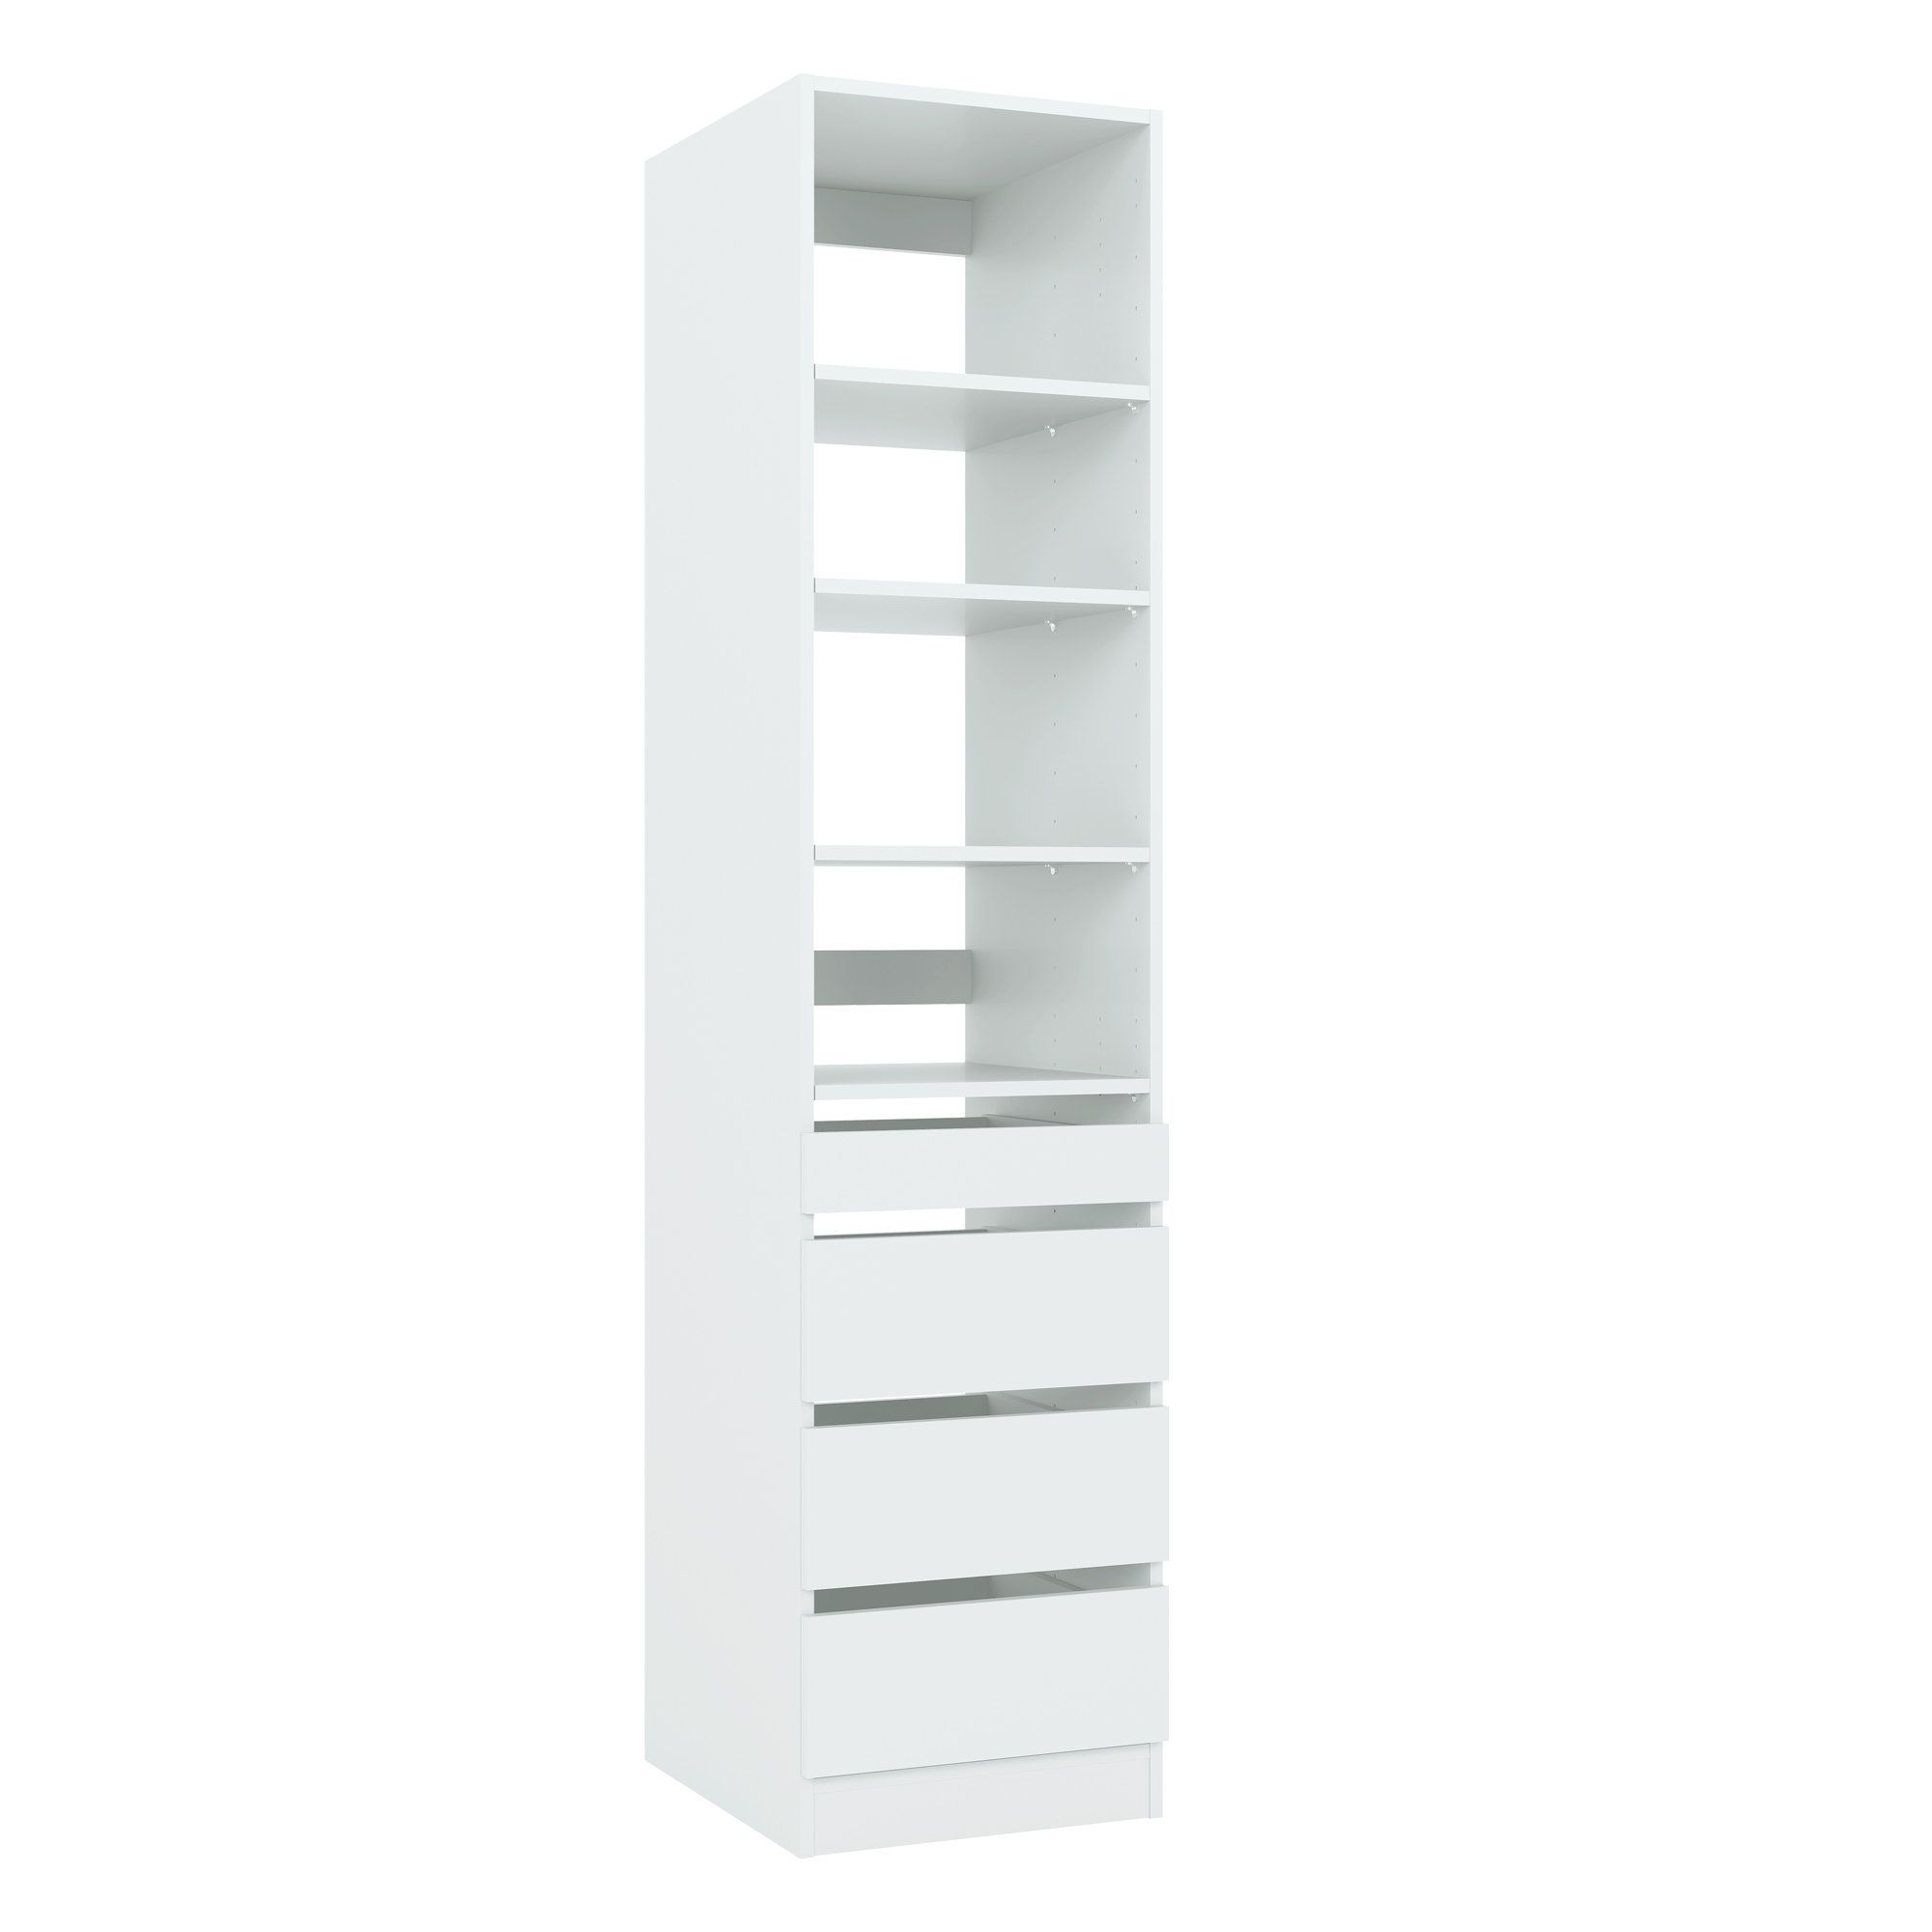 Closet & Co 18'' W Closet System Walk In Tower | Wayfair Intended For 3 Shelving Towers Wardrobes (View 11 of 15)